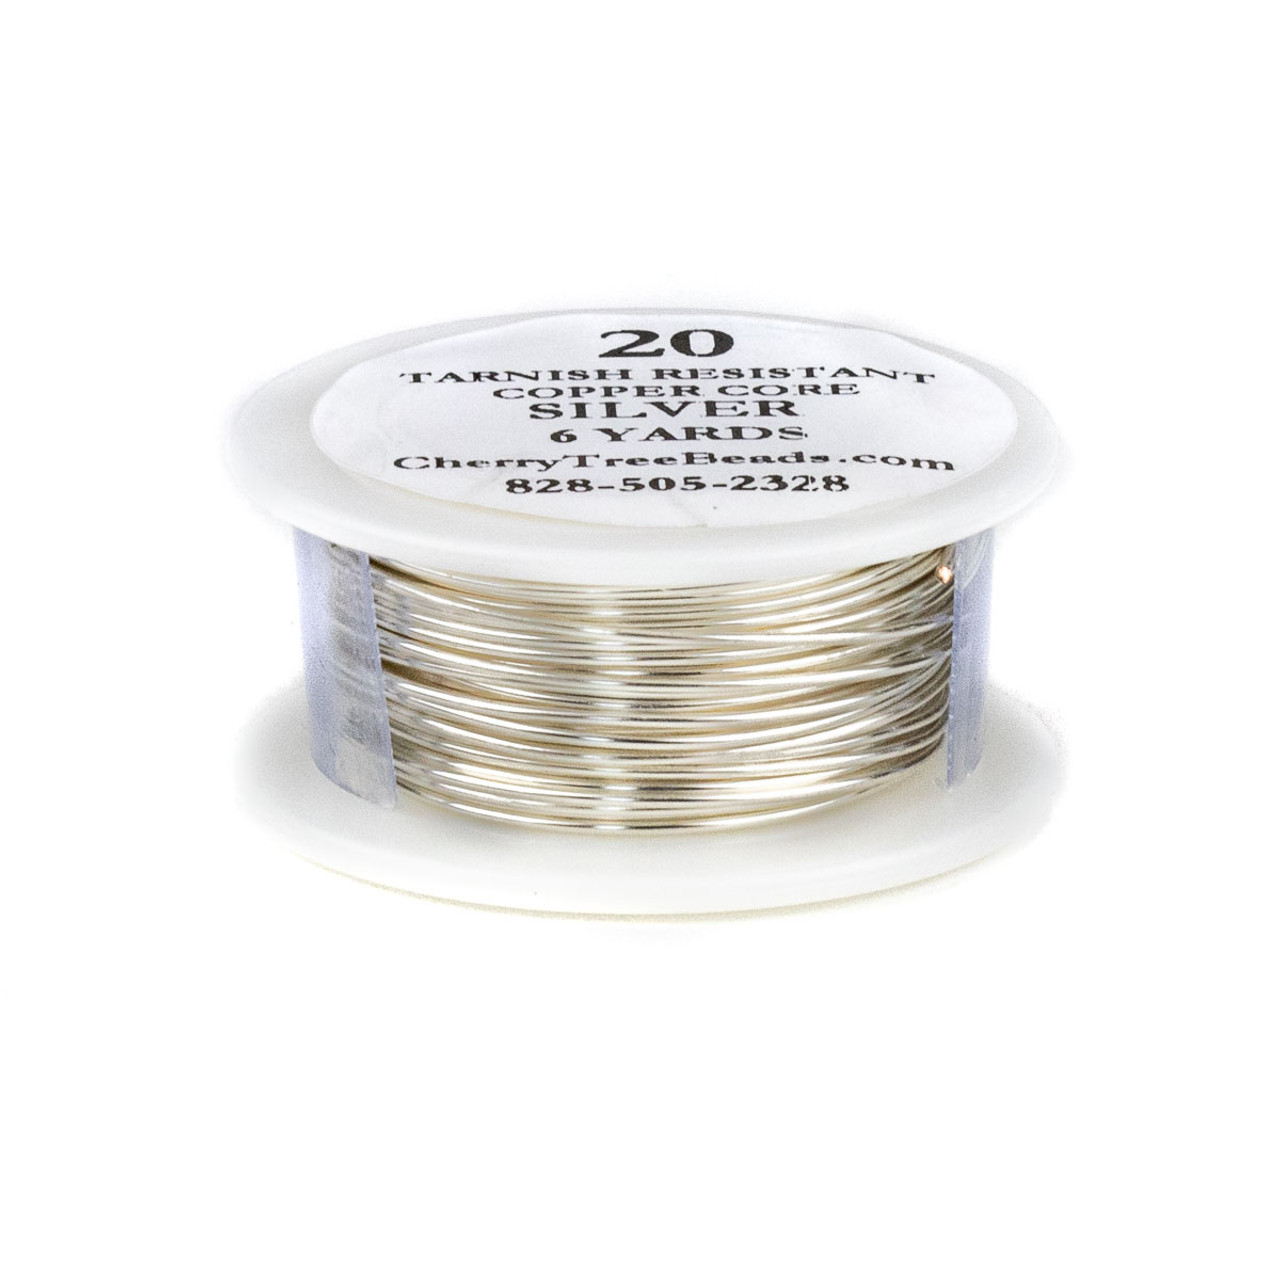 20 Gauge Coated Tarnish Resistant Fine Silver Plated Copper Wire on 6-Yard  Spool